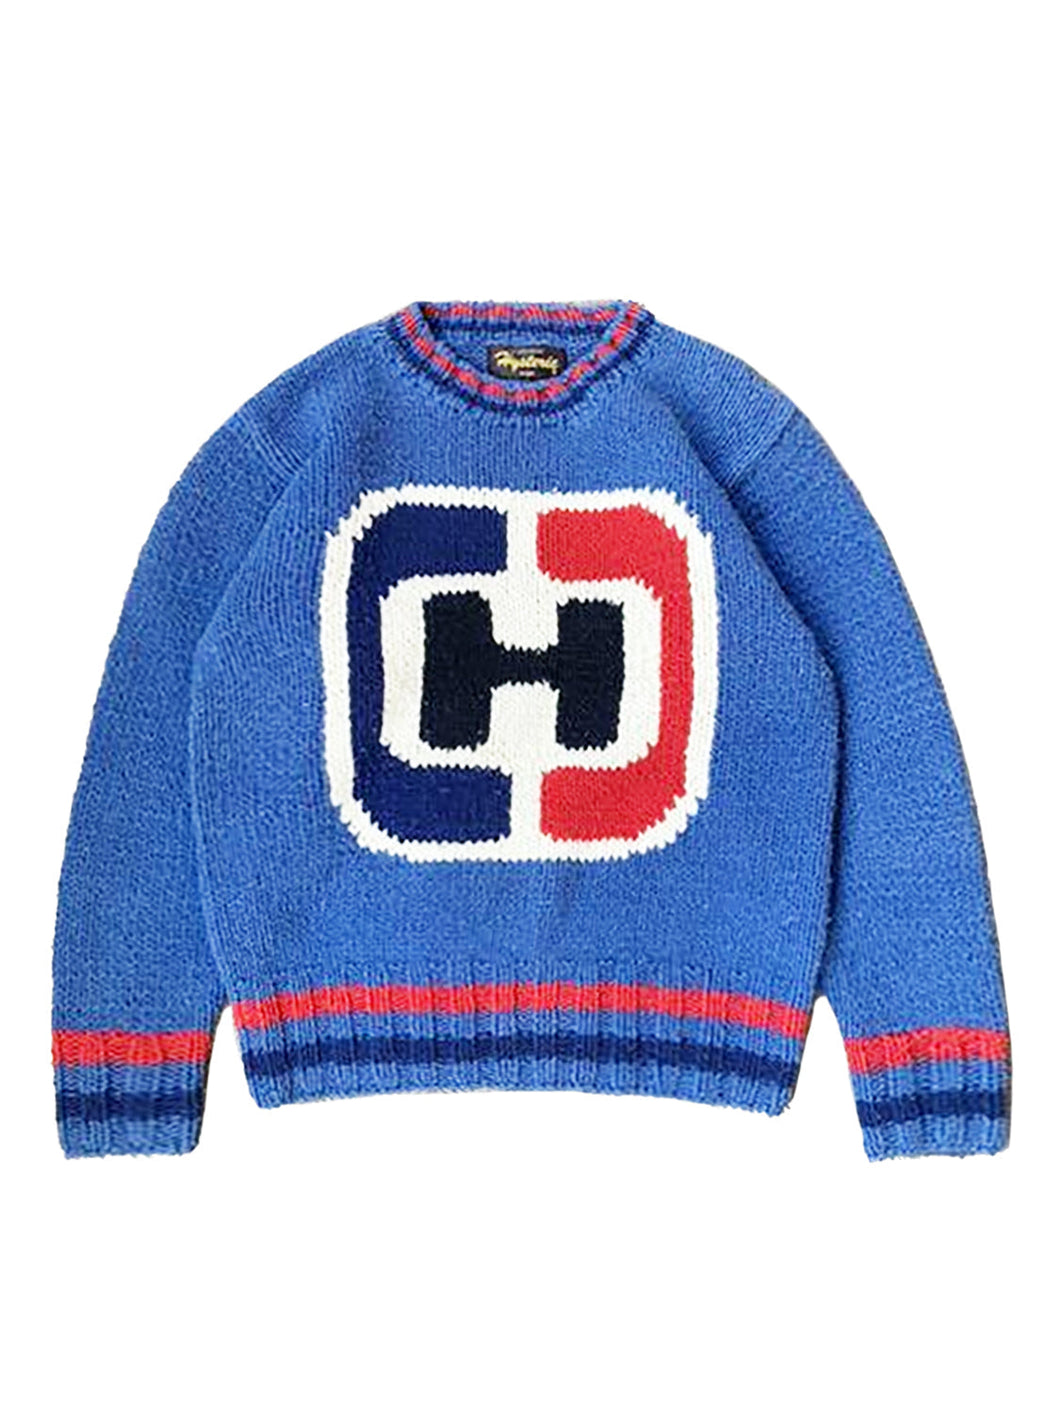 Hysteric Glamour Large H Blue and Red Knit Sweater